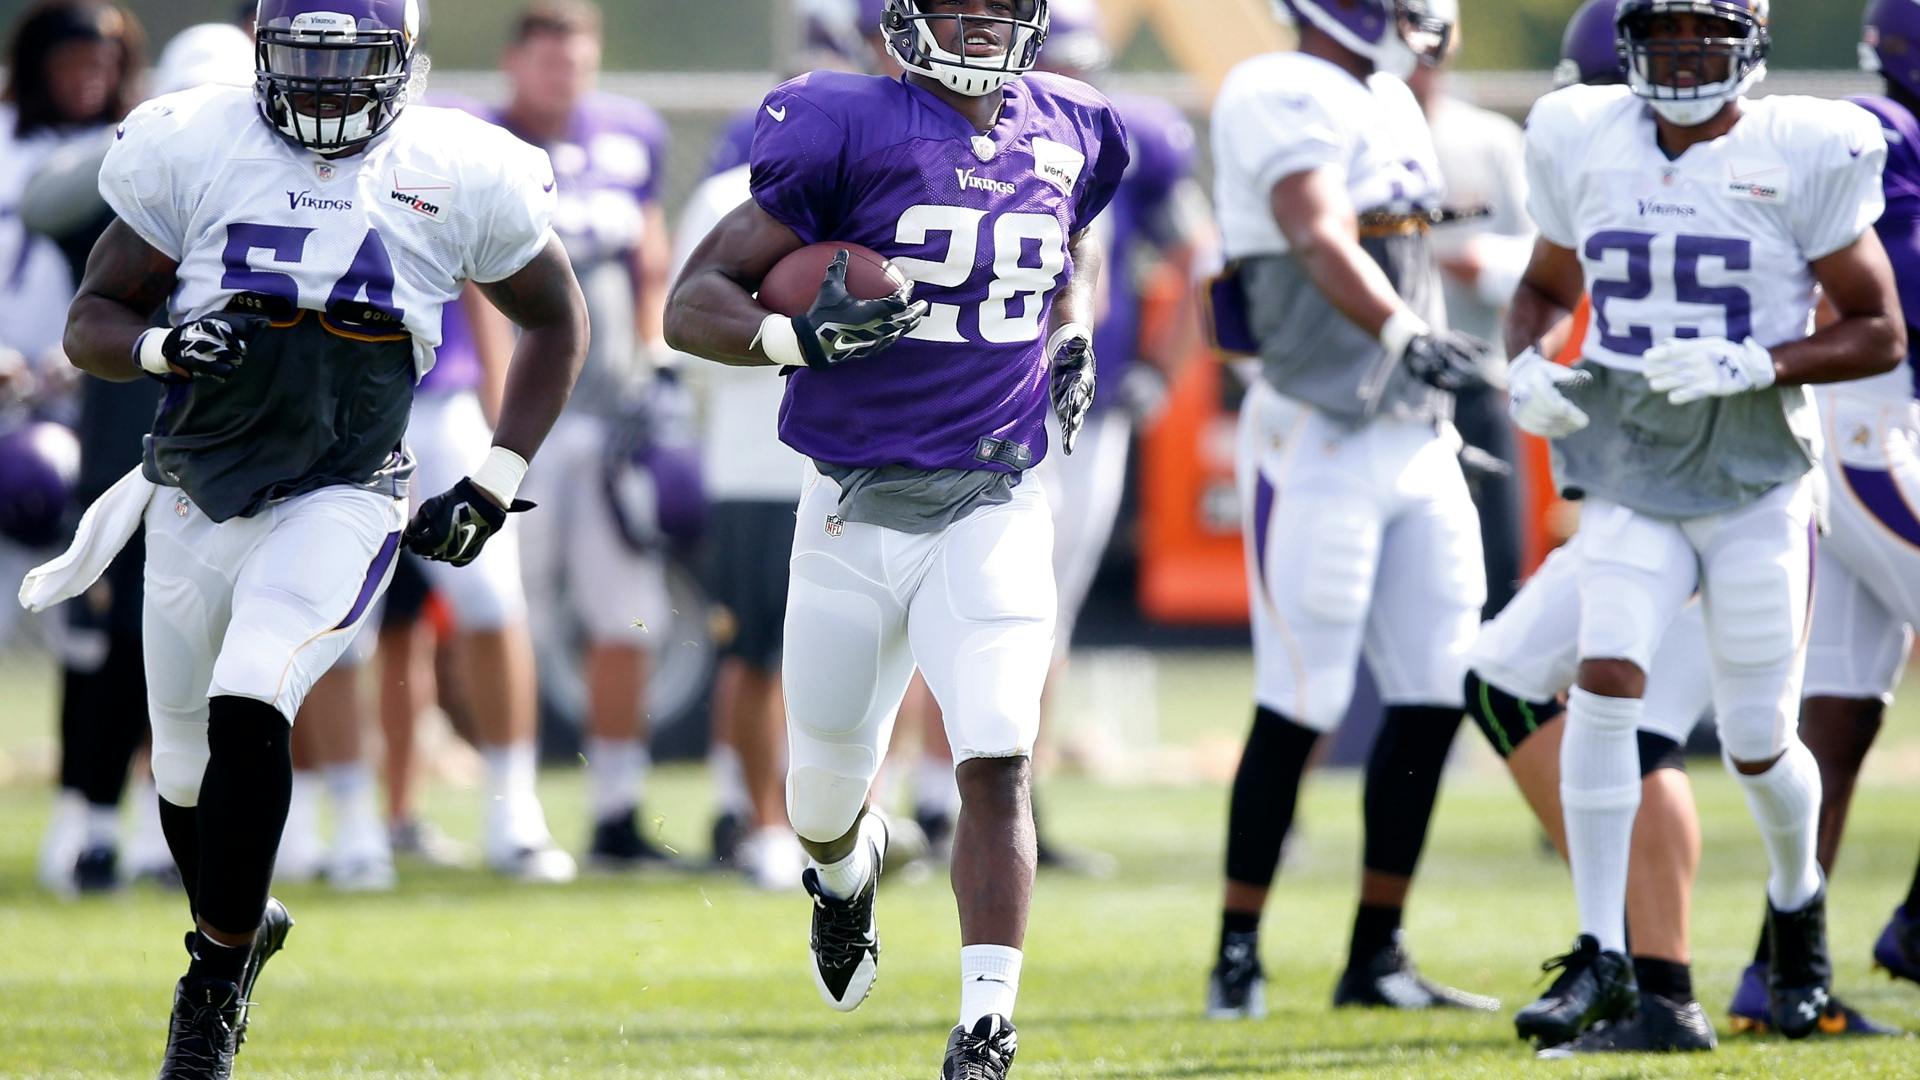 Although he won't predict a number, Vikings running back Adrian Peterson is confident that his carry total will be high in the upcoming season.